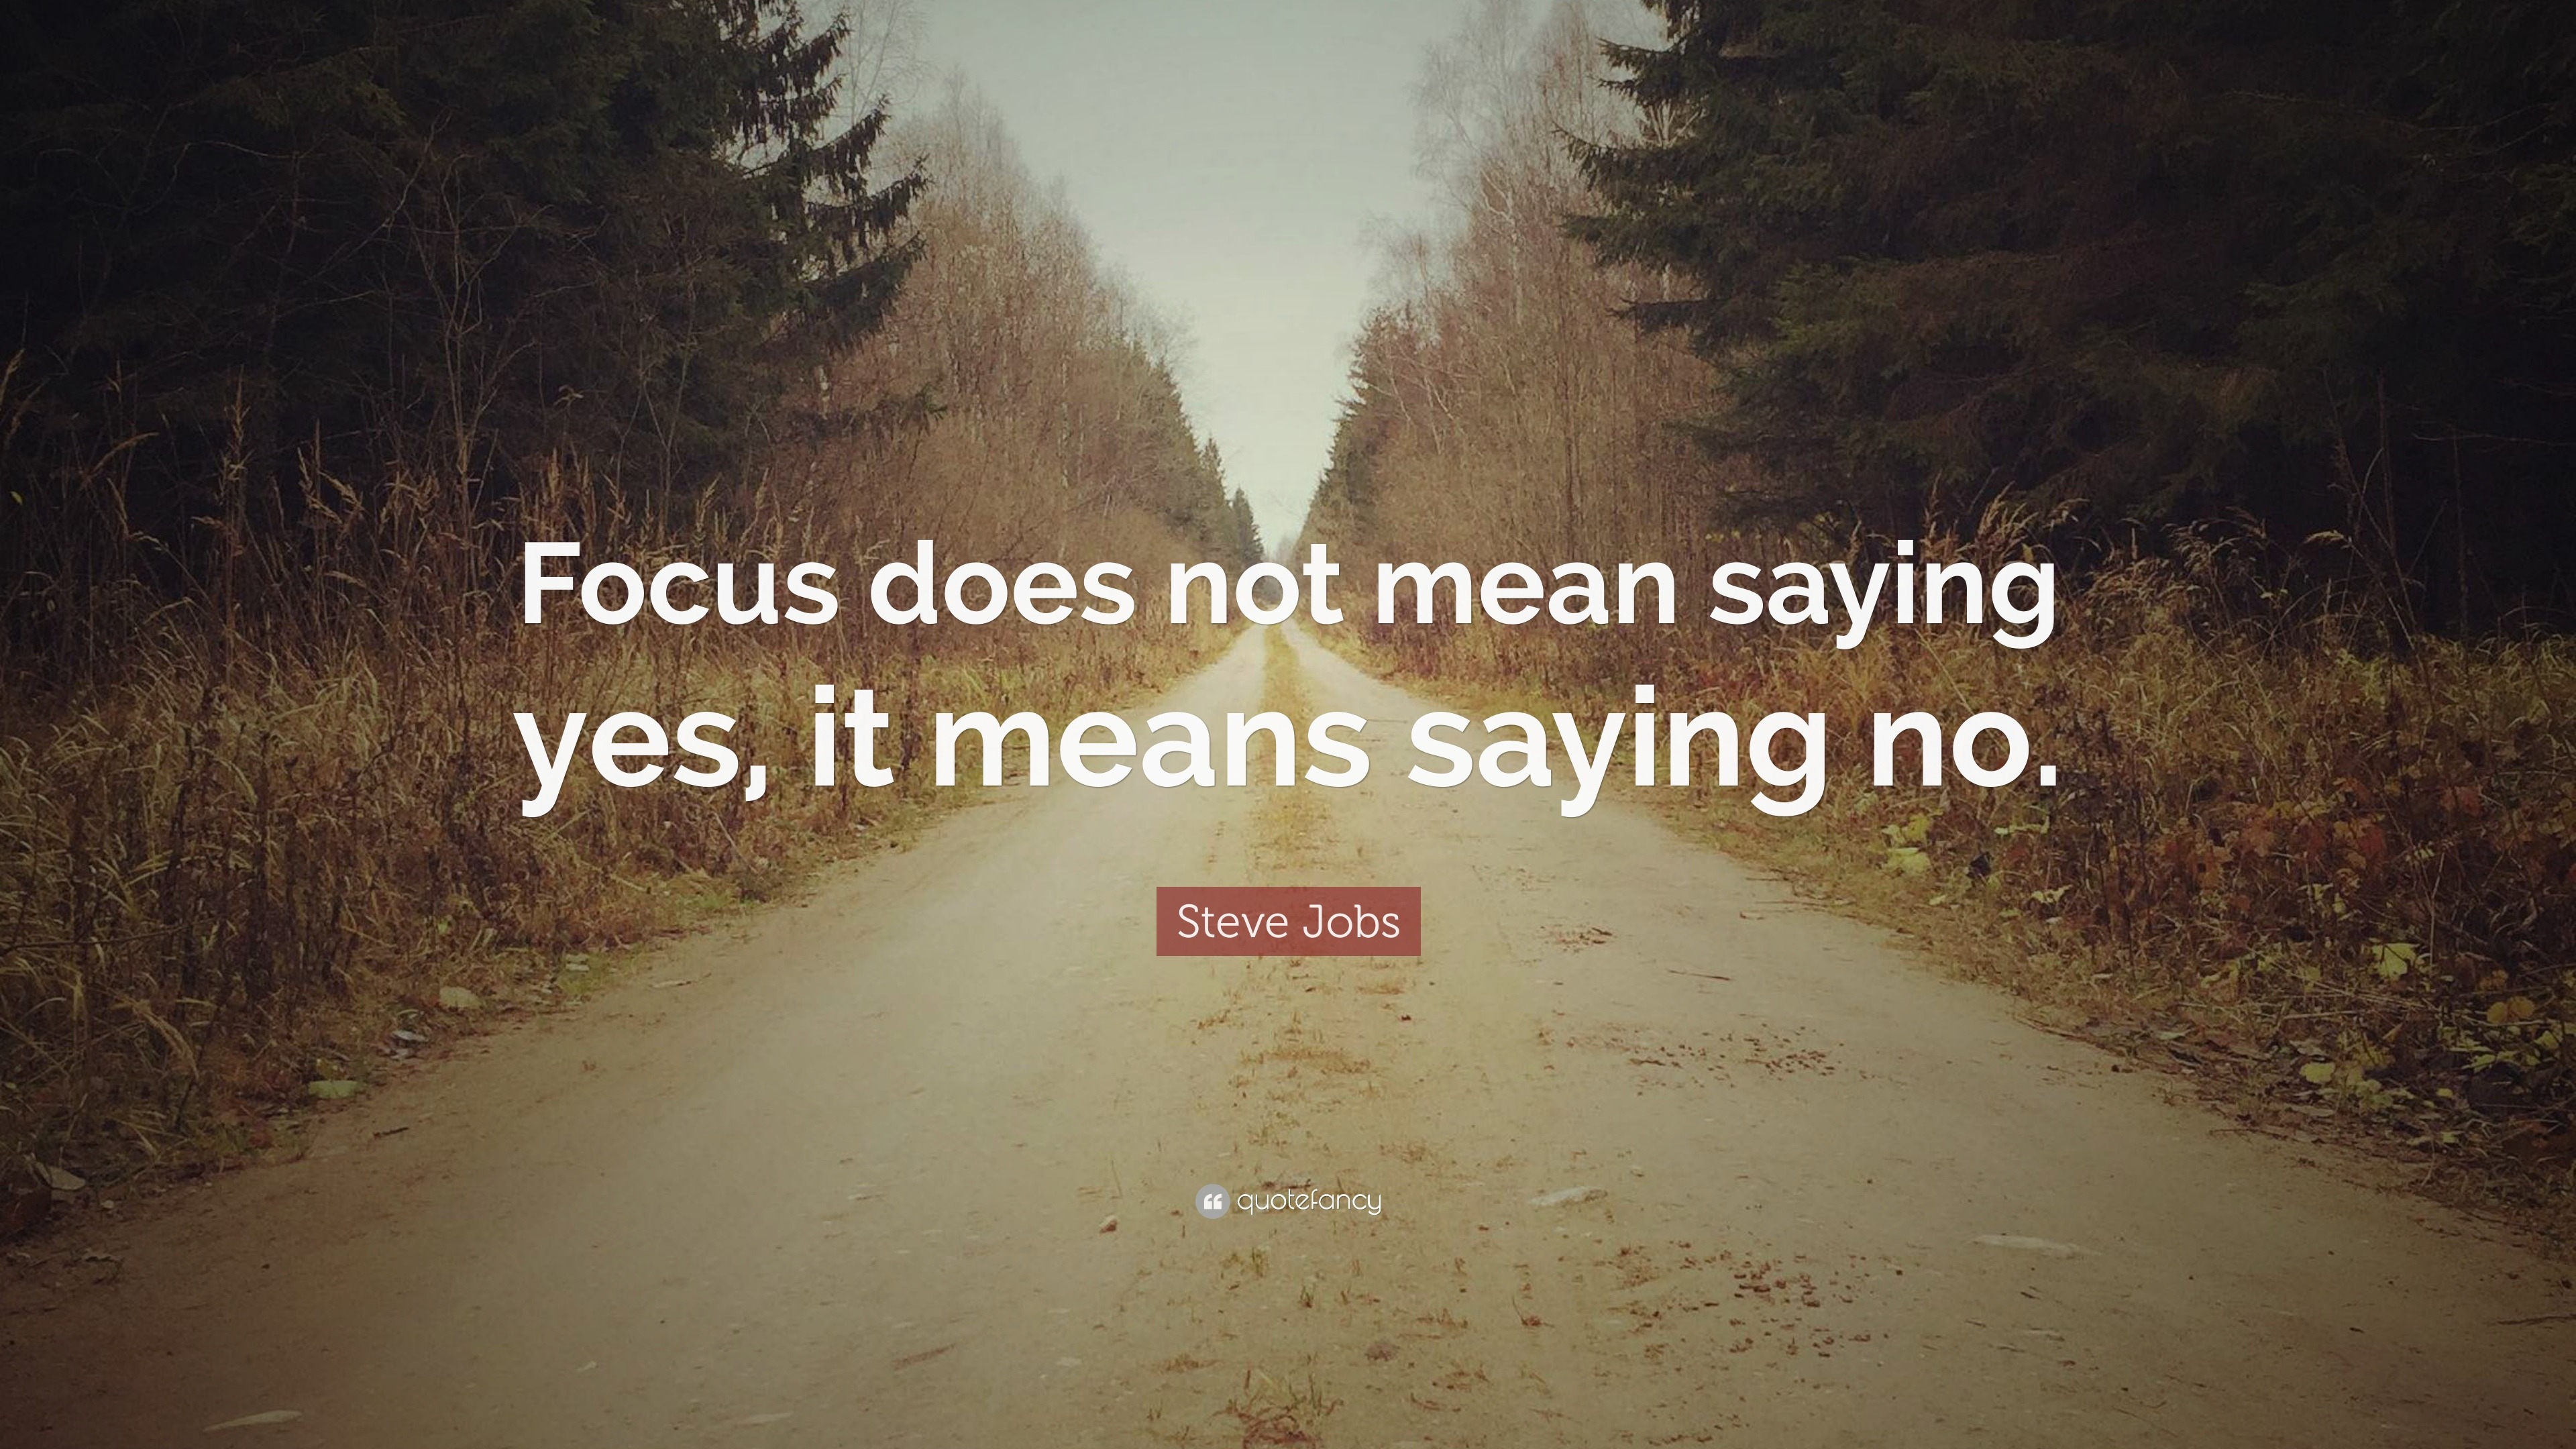 Steve Jobs Quote: “Focus does not mean saying yes, it means saying no.”